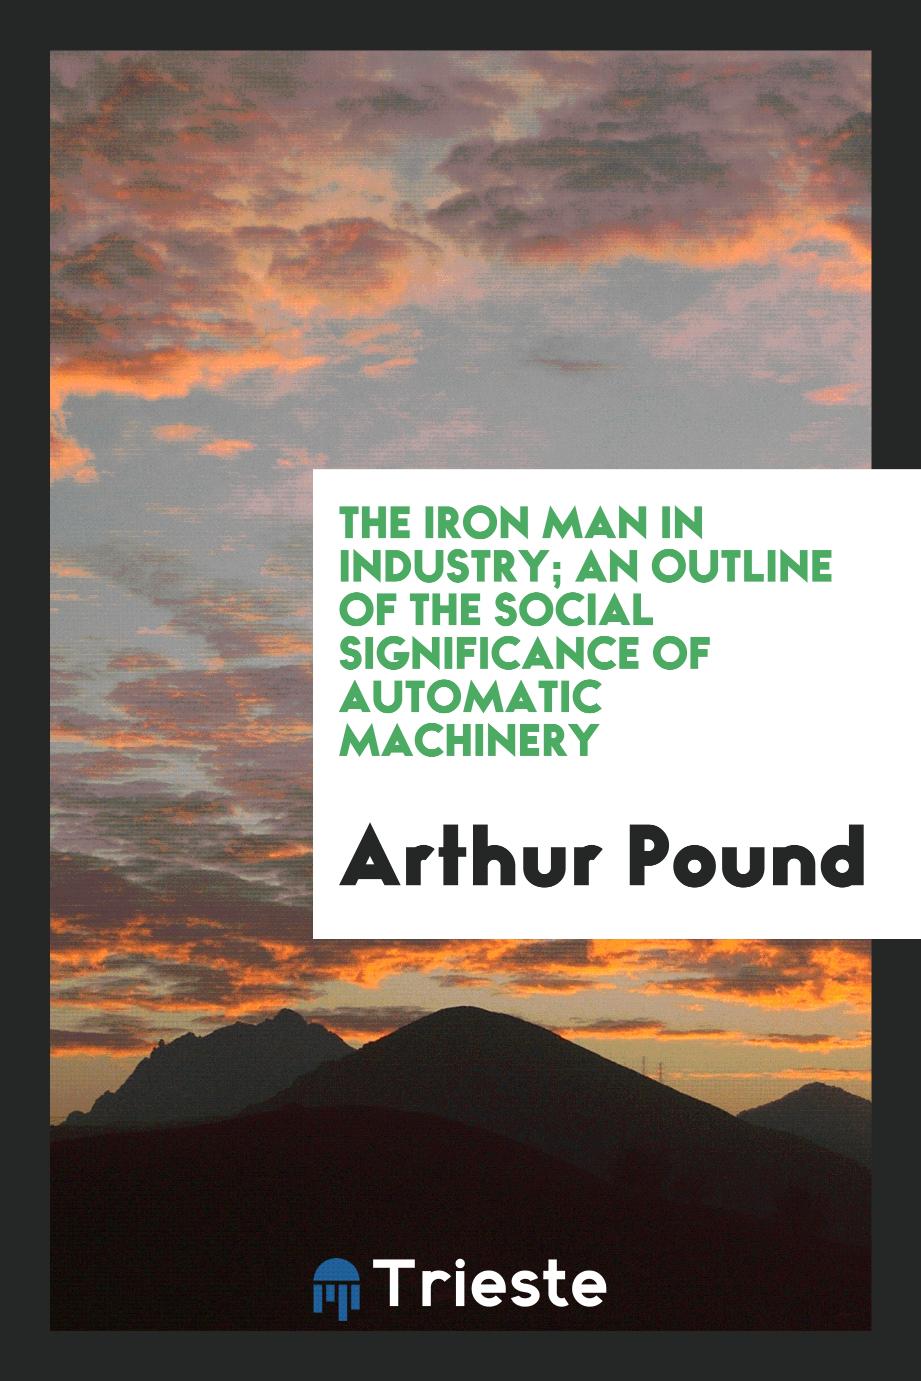 The iron man in industry; an outline of the social significance of automatic machinery